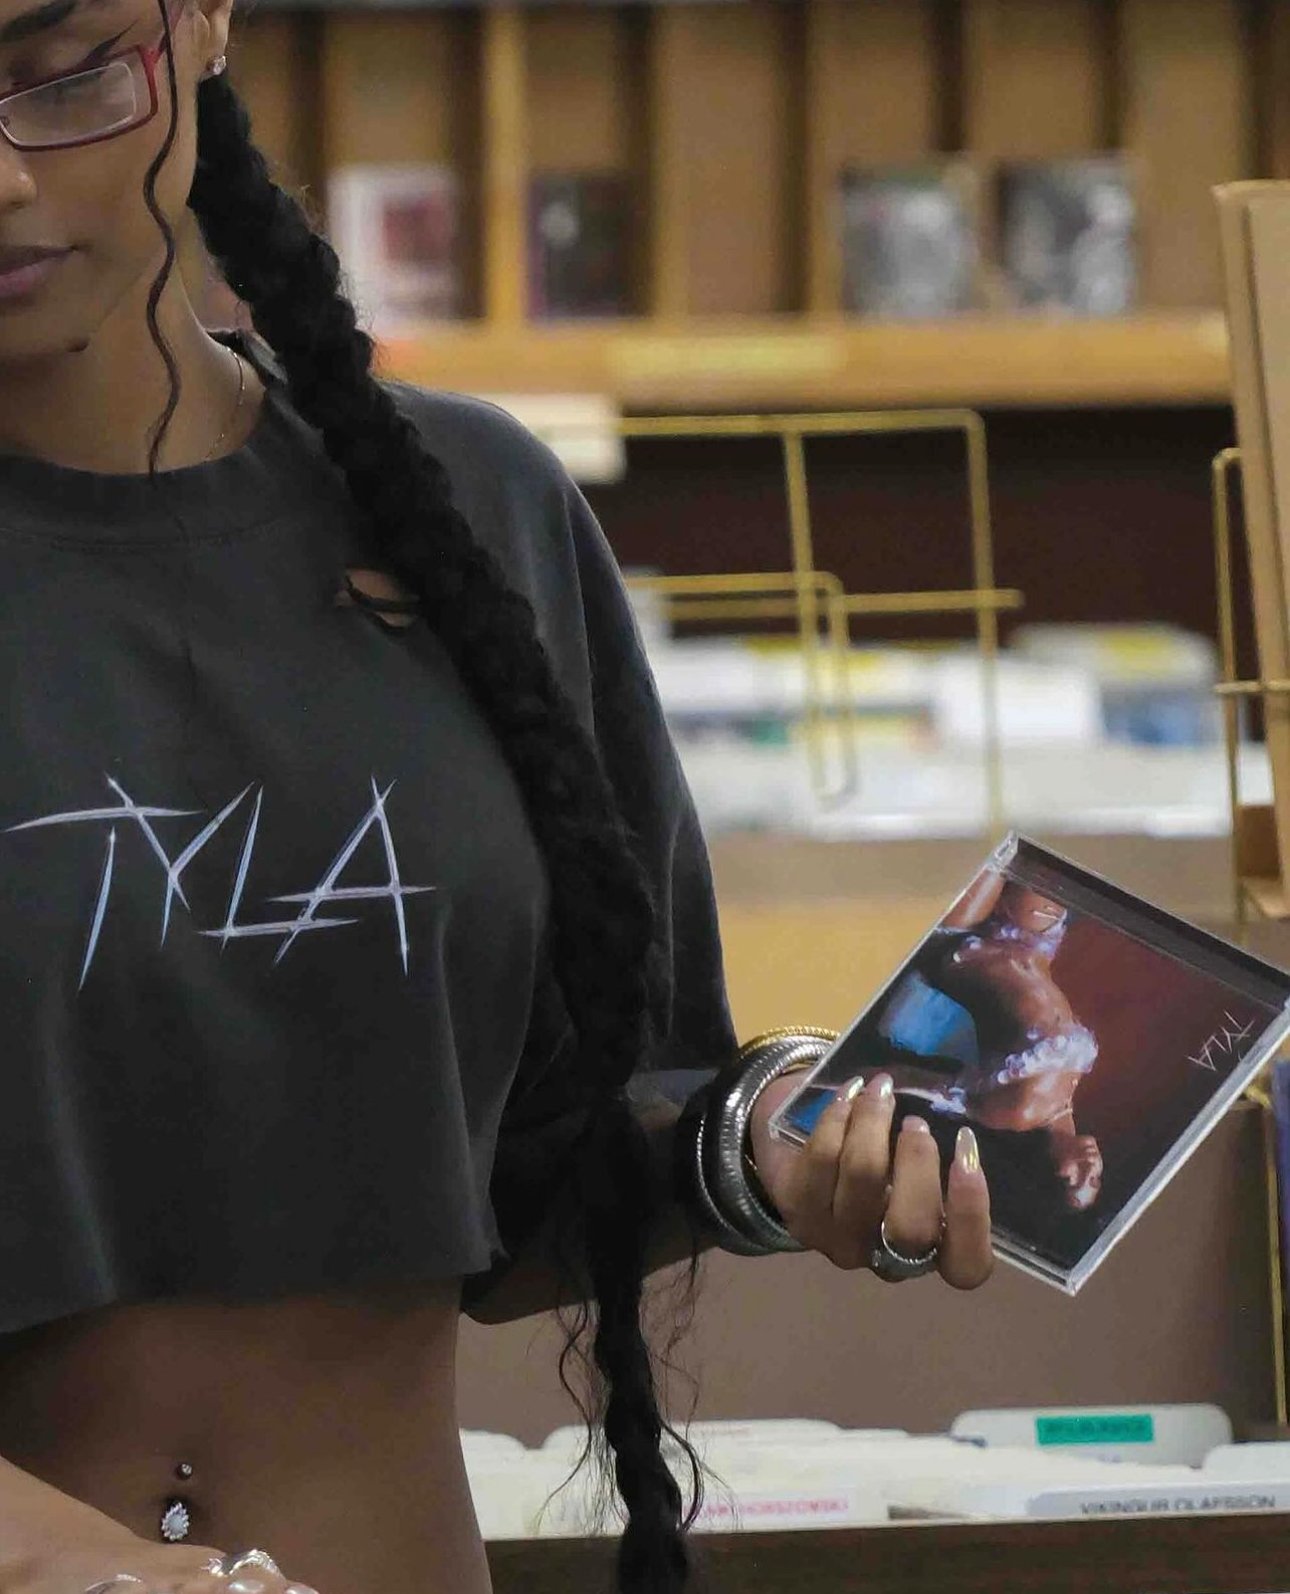 Tyla drops self-titled debut album with lead single featuring